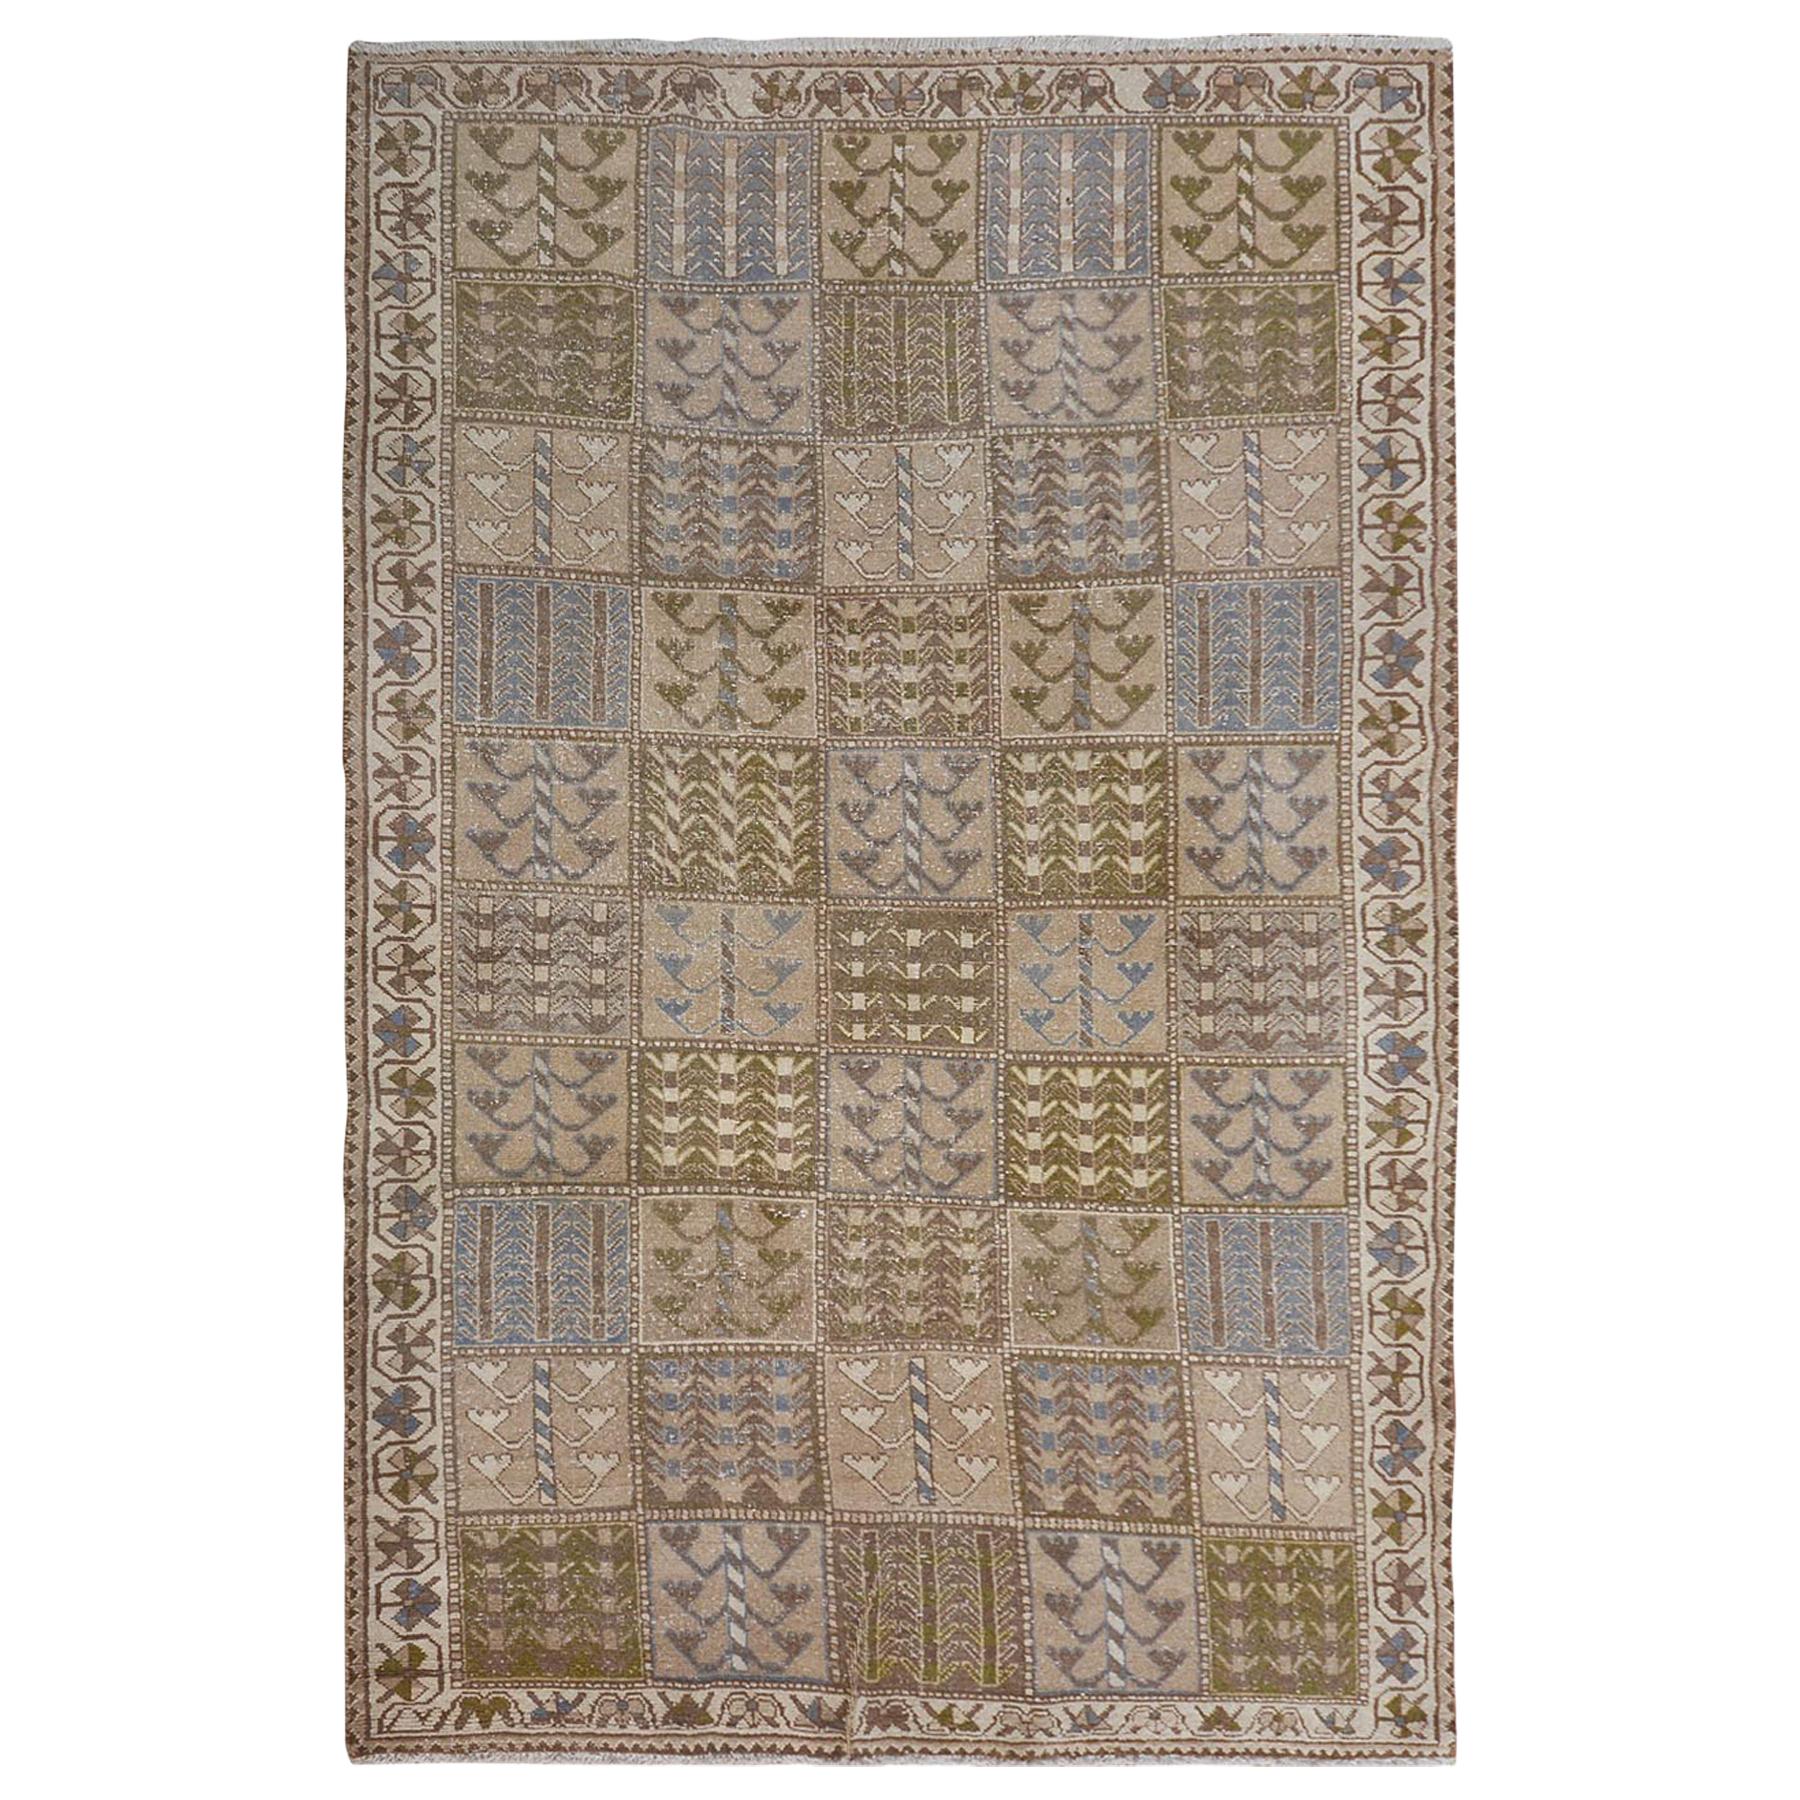 Natural Colors Gallery Size Old and Worn Down Persian Bakhtiari Hand Knotted Rug